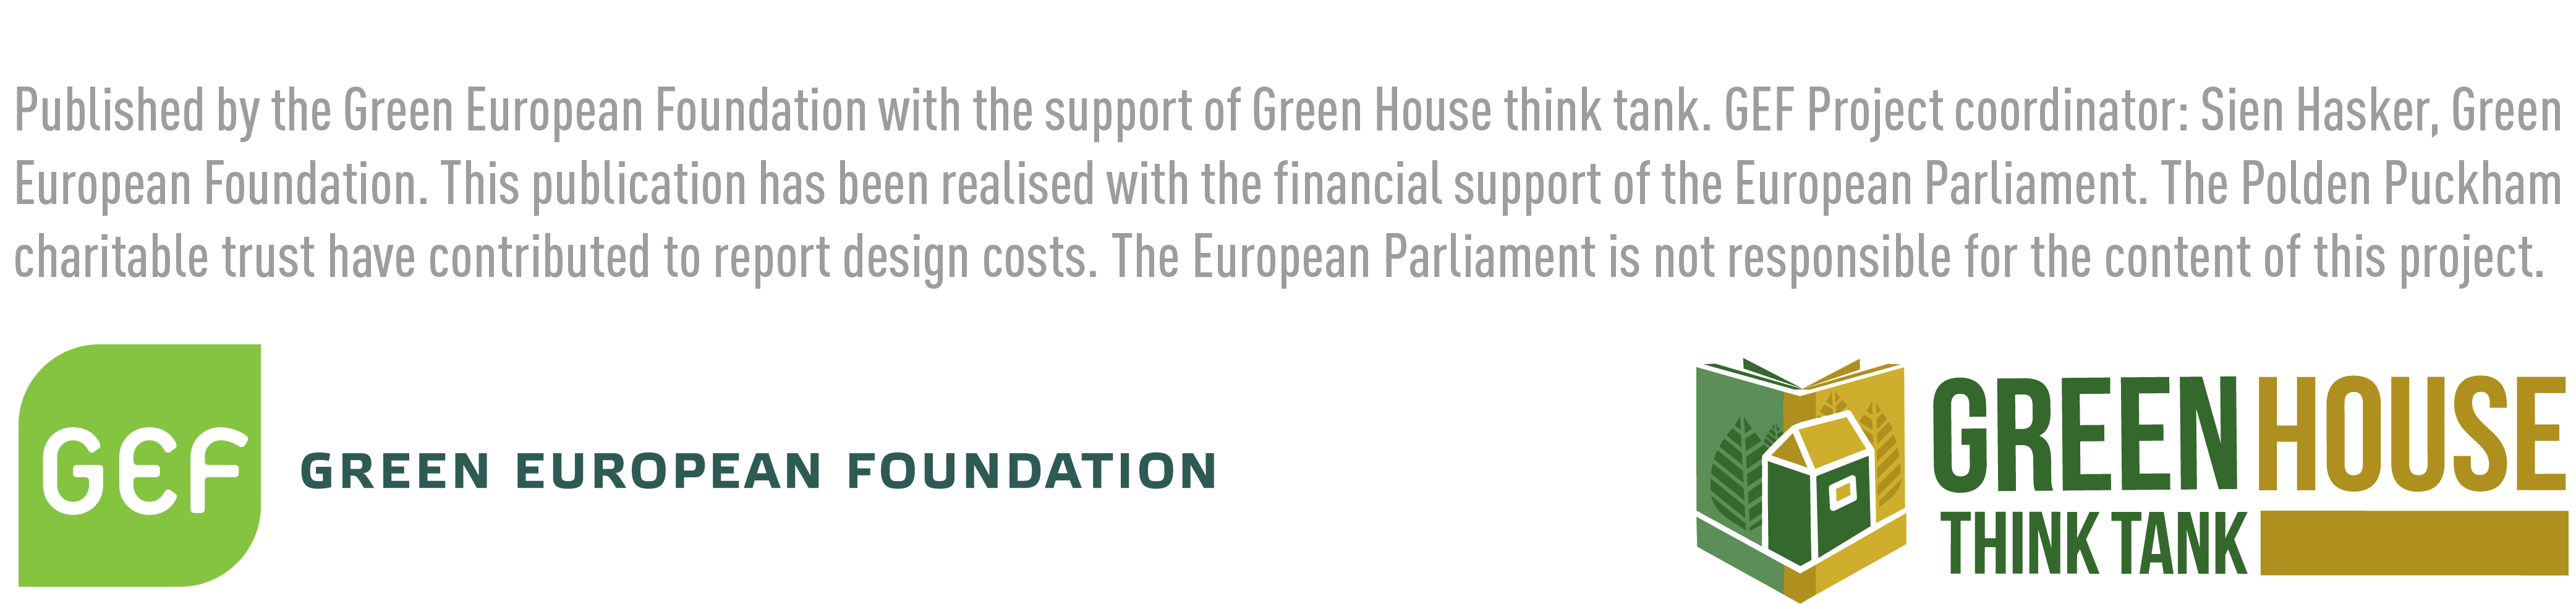 Image is Green House and the Green European Foundation's logo, and a statement which reads 'Published by the Green European Foundation with the support of Green House think tank. GEF Project coordinator: Sian Hasker, Green European Foundation. This publication has been realised with the financial support of the European Parliament. The Polden Puckham charitable trust have contributed to report design costs. The European Parliament is not responsible for the content of this project. 